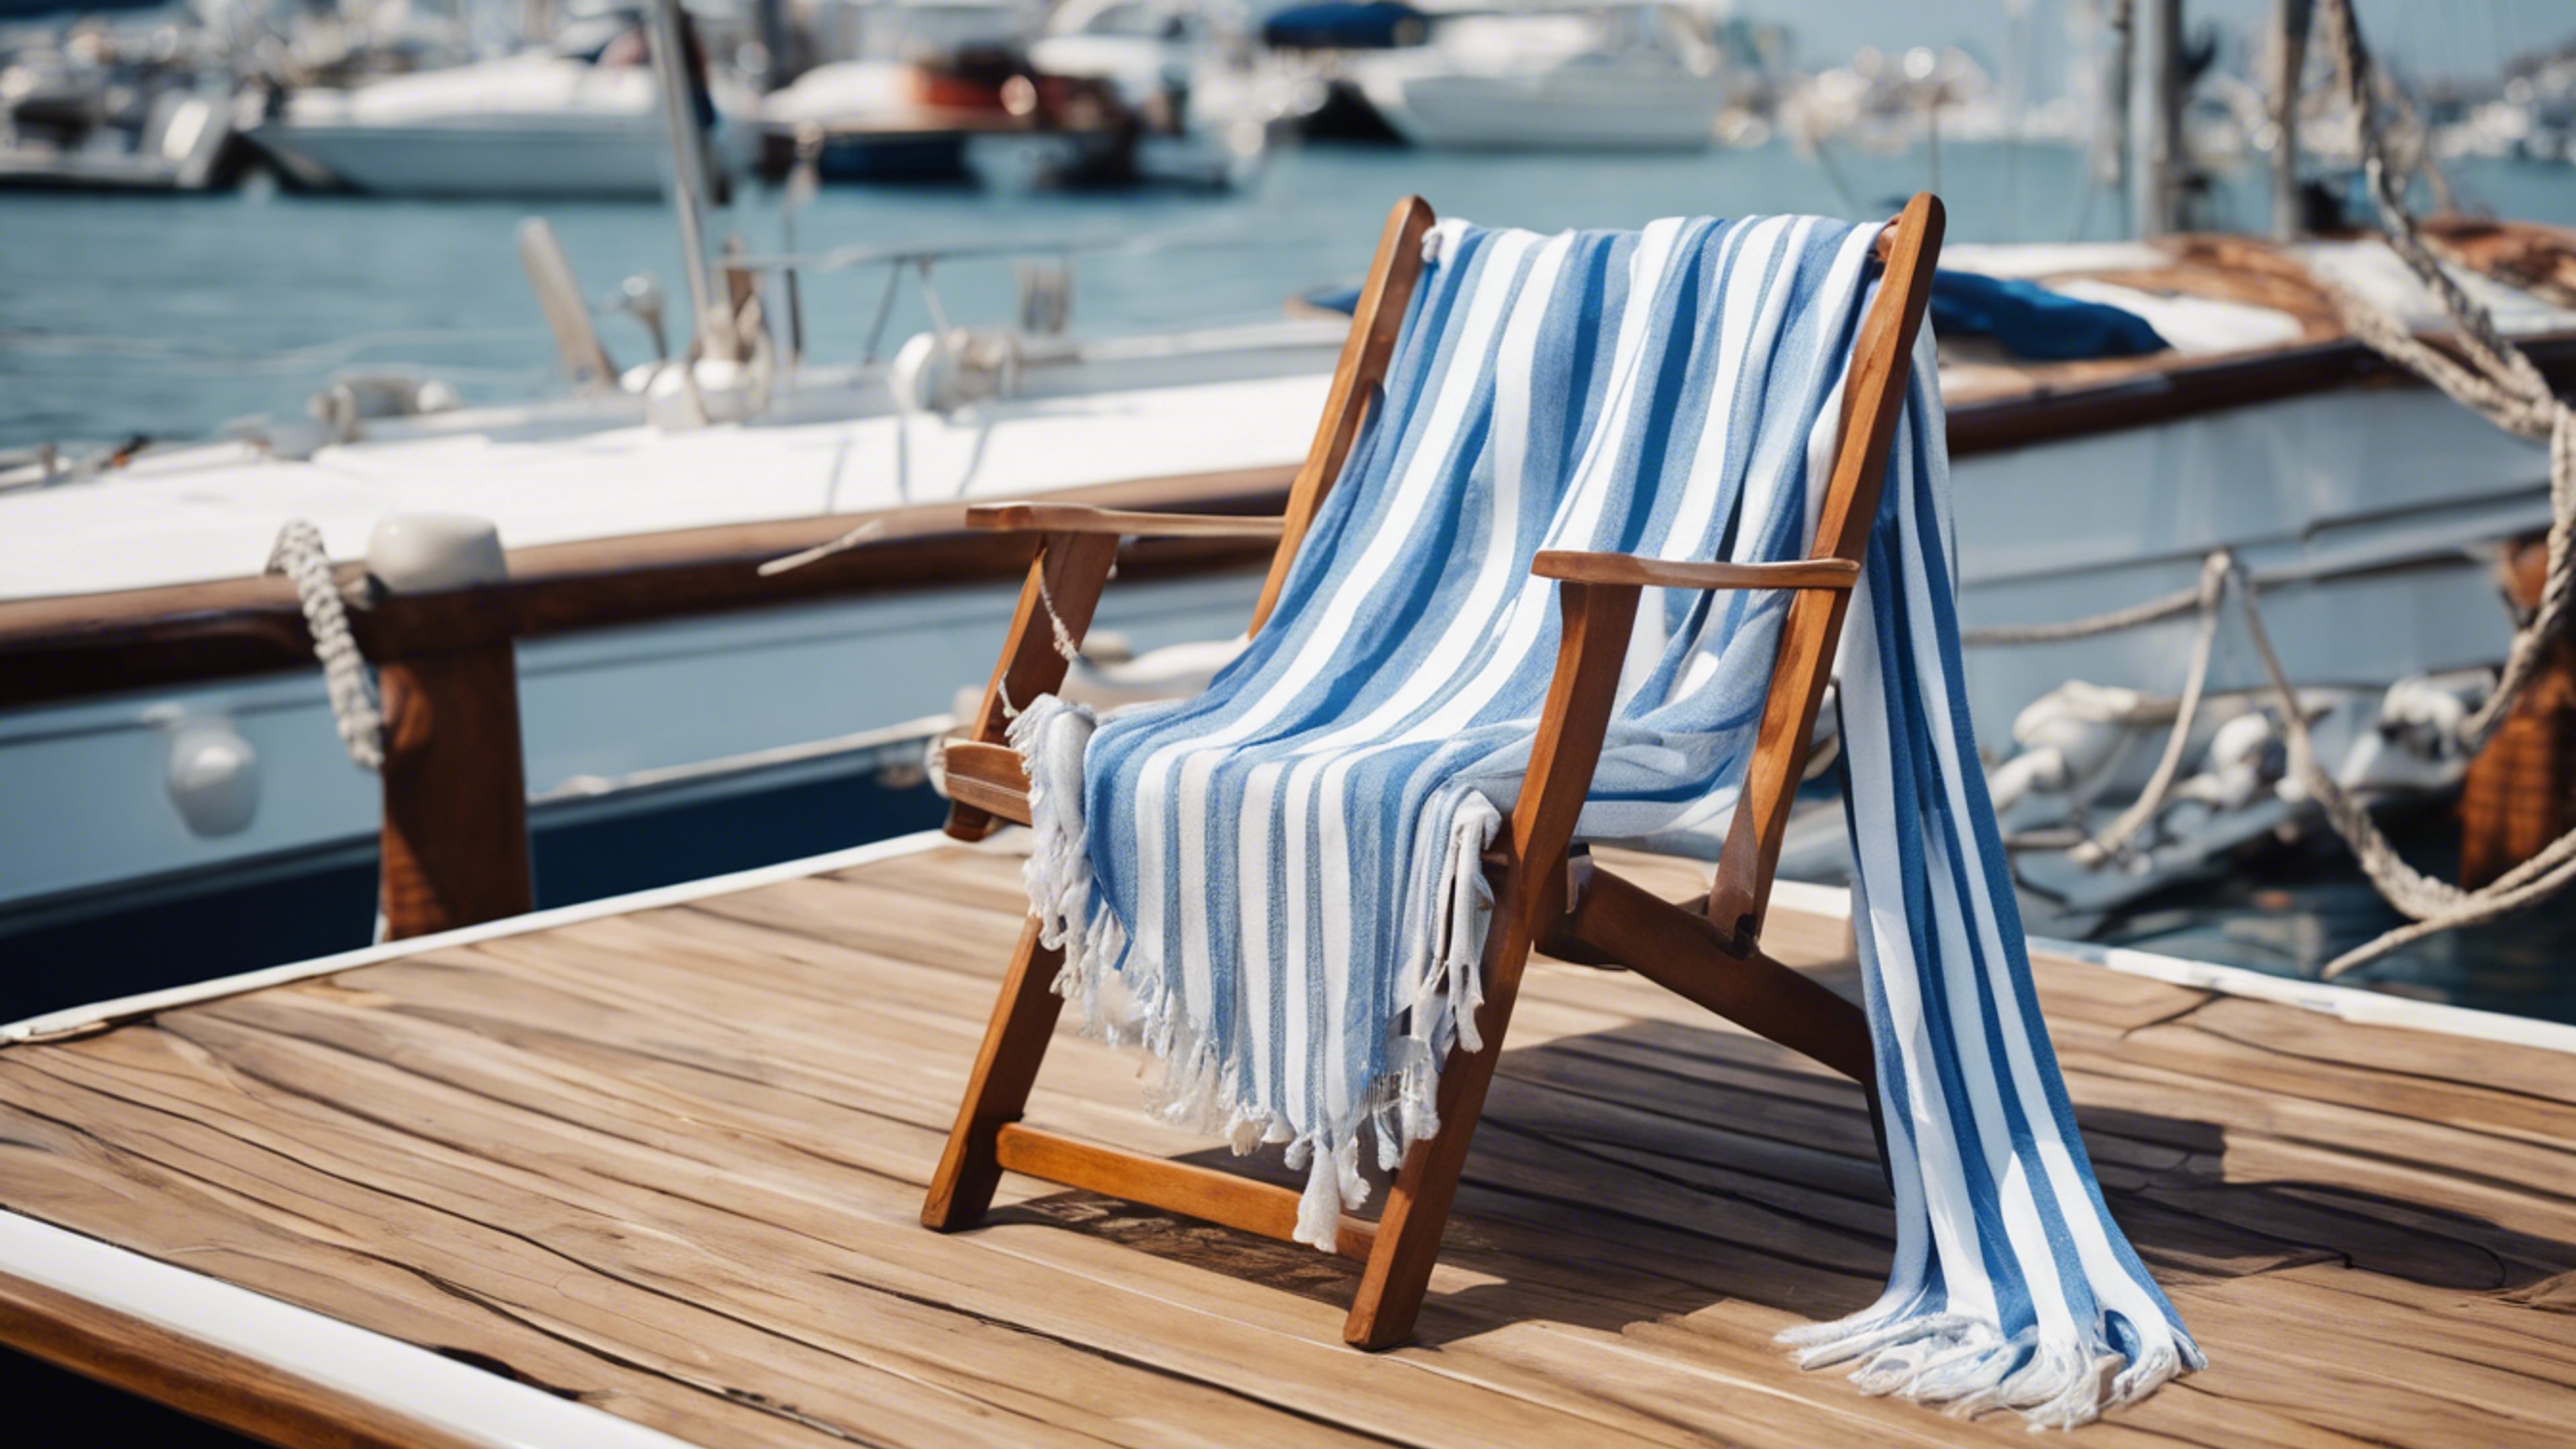 Preppy blue and white striped shawl draped over a teak deck chair on a sailboat. Валлпапер[8e59a438a9aa4e06a25d]